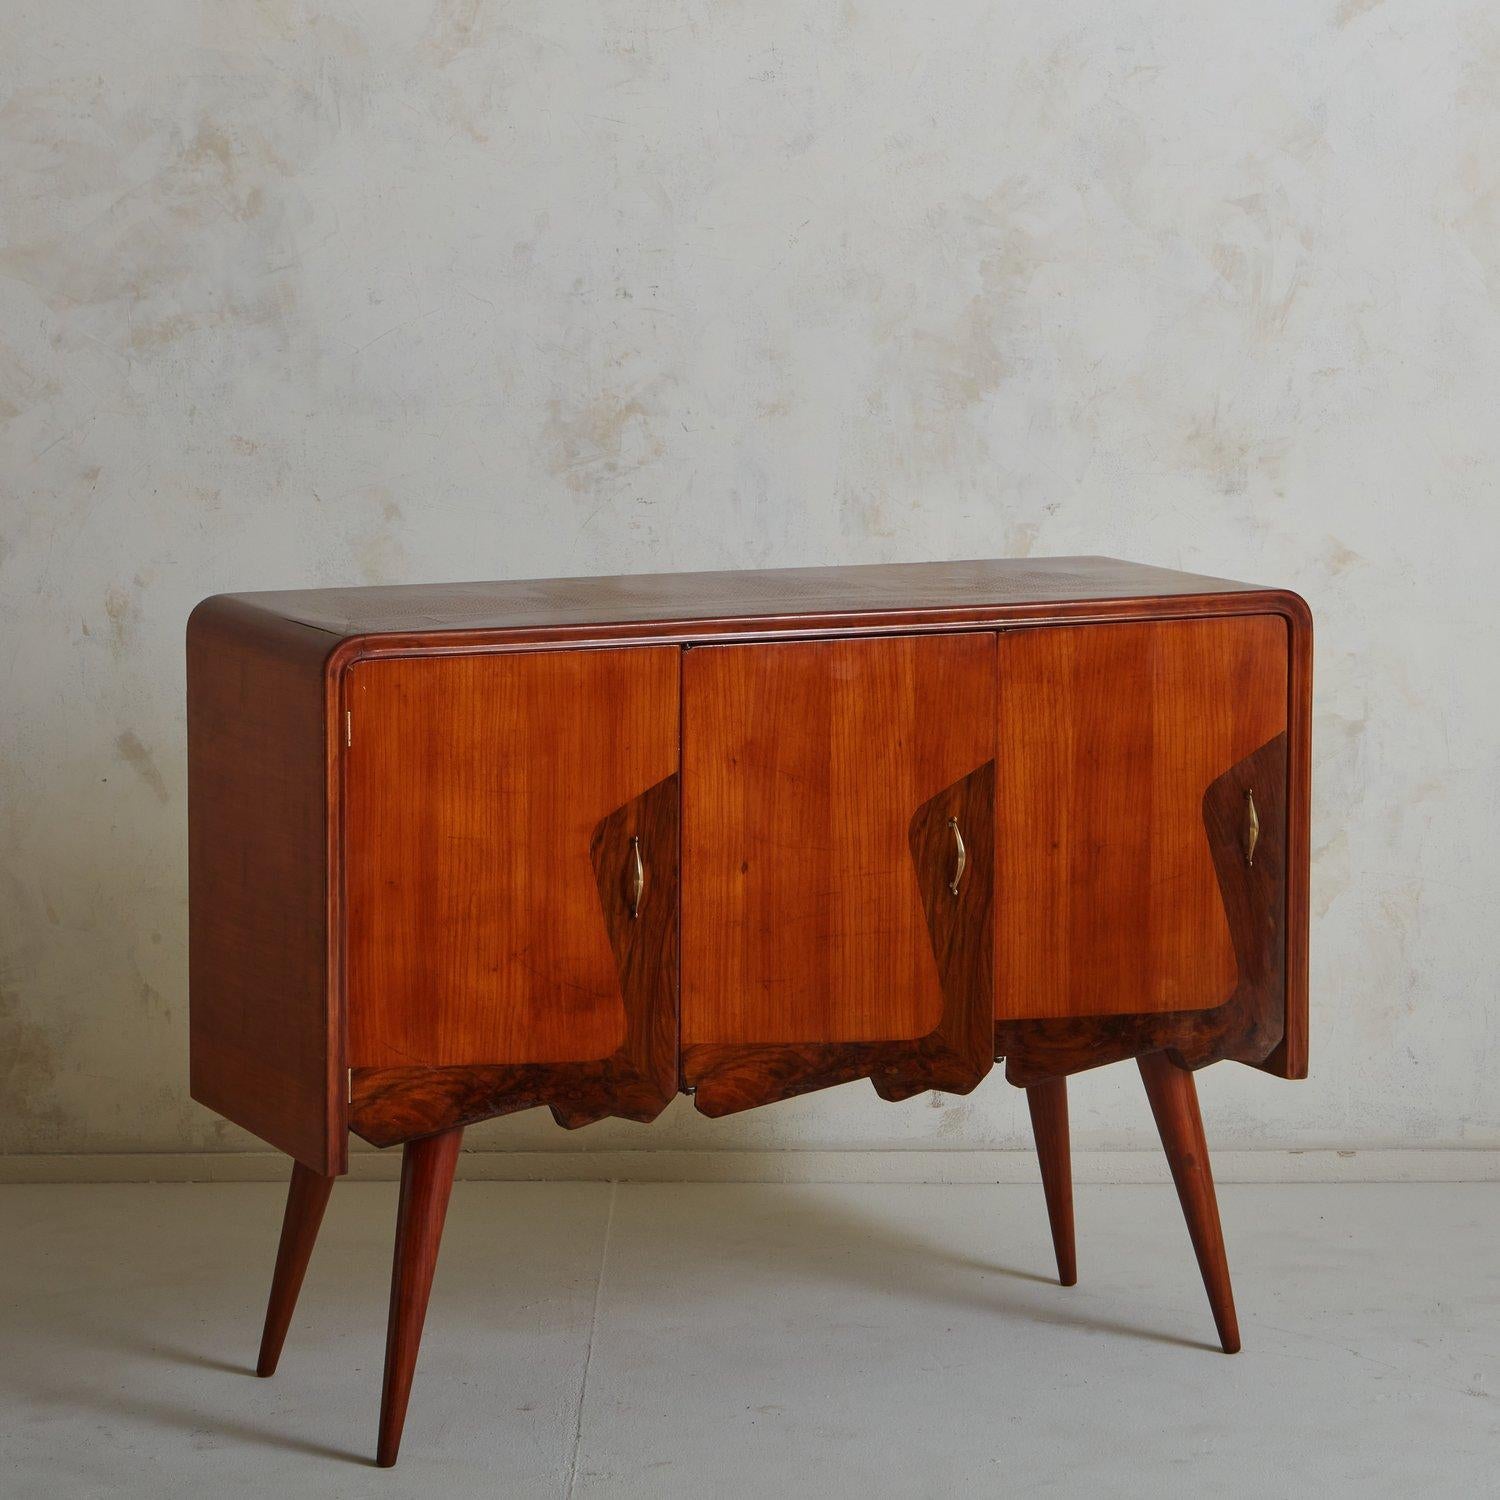 A handsome 1960s Italian credenza constructed with cherry wood. This piece has three doors with inlaid burl wood detailing and brass hardware. It stands on tapered, angled legs. Retains ‘Giuseppe Galli & Figli S.R.L. Mobili’ label en verso. Sourced